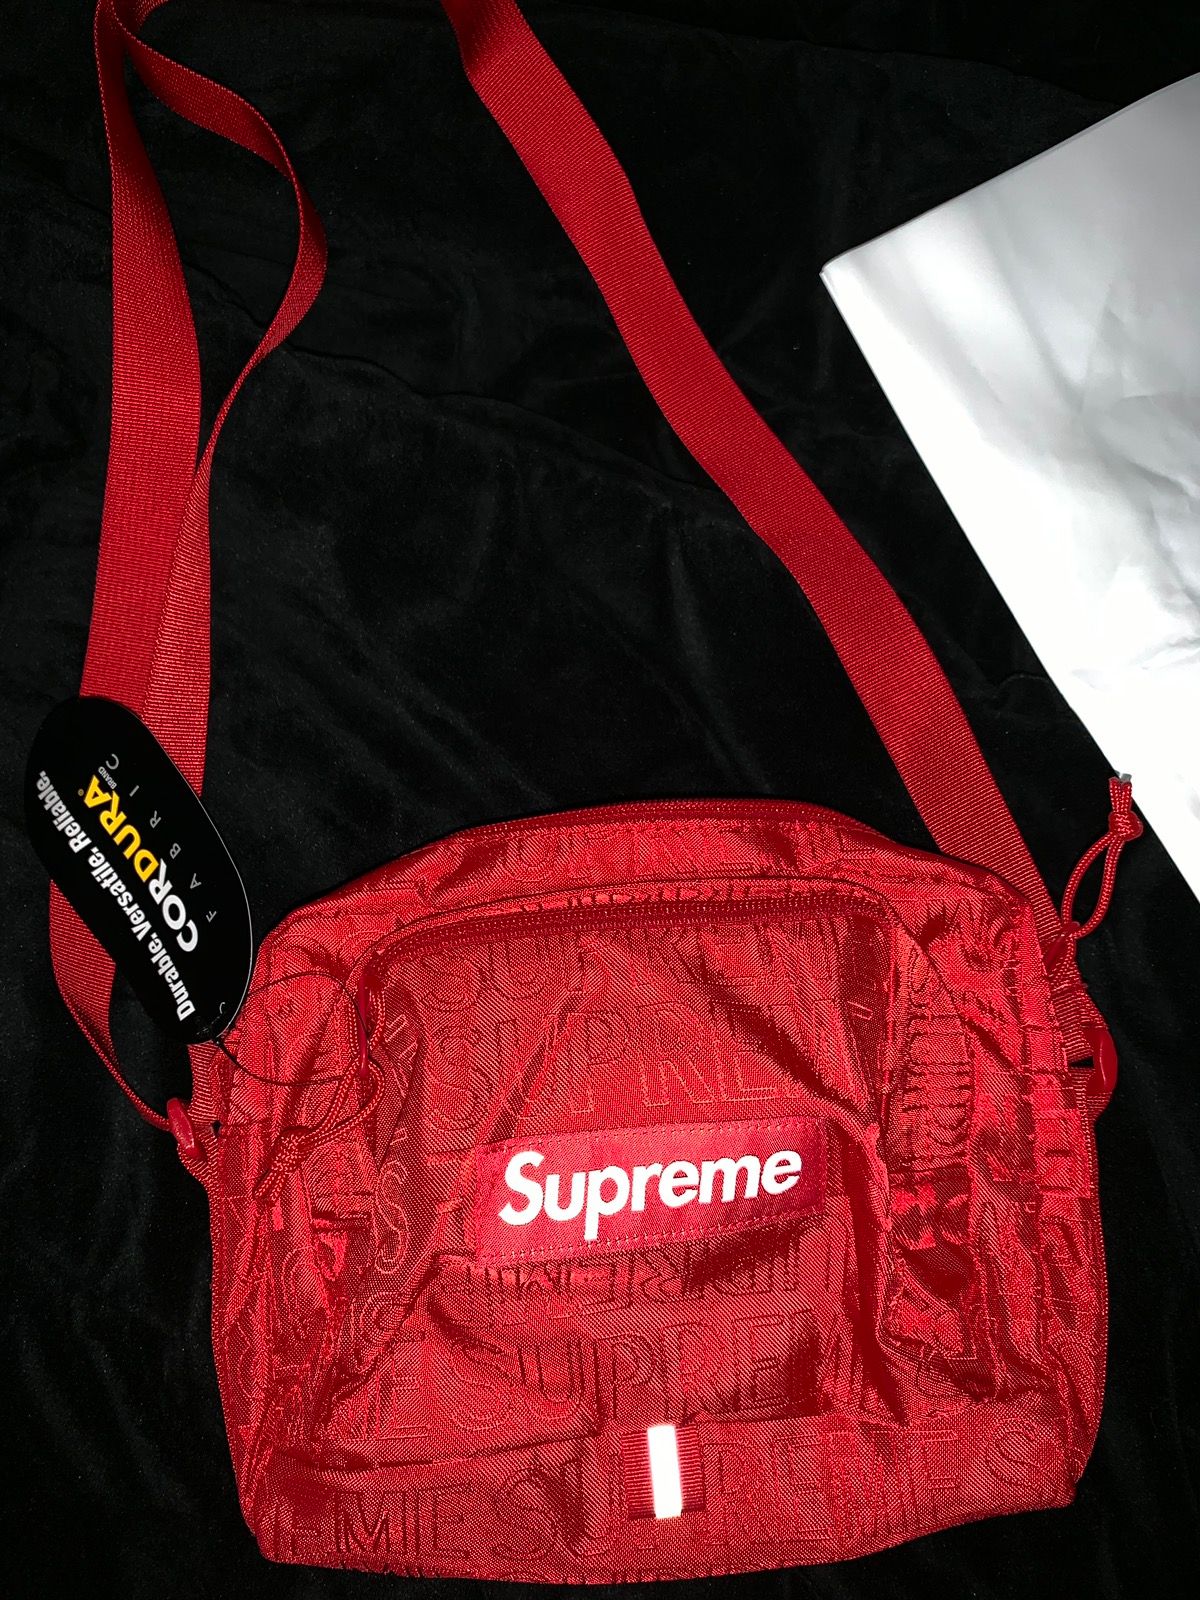 Supreme Shoulder Bag, Red, One size, Body SS19 100% Authentic